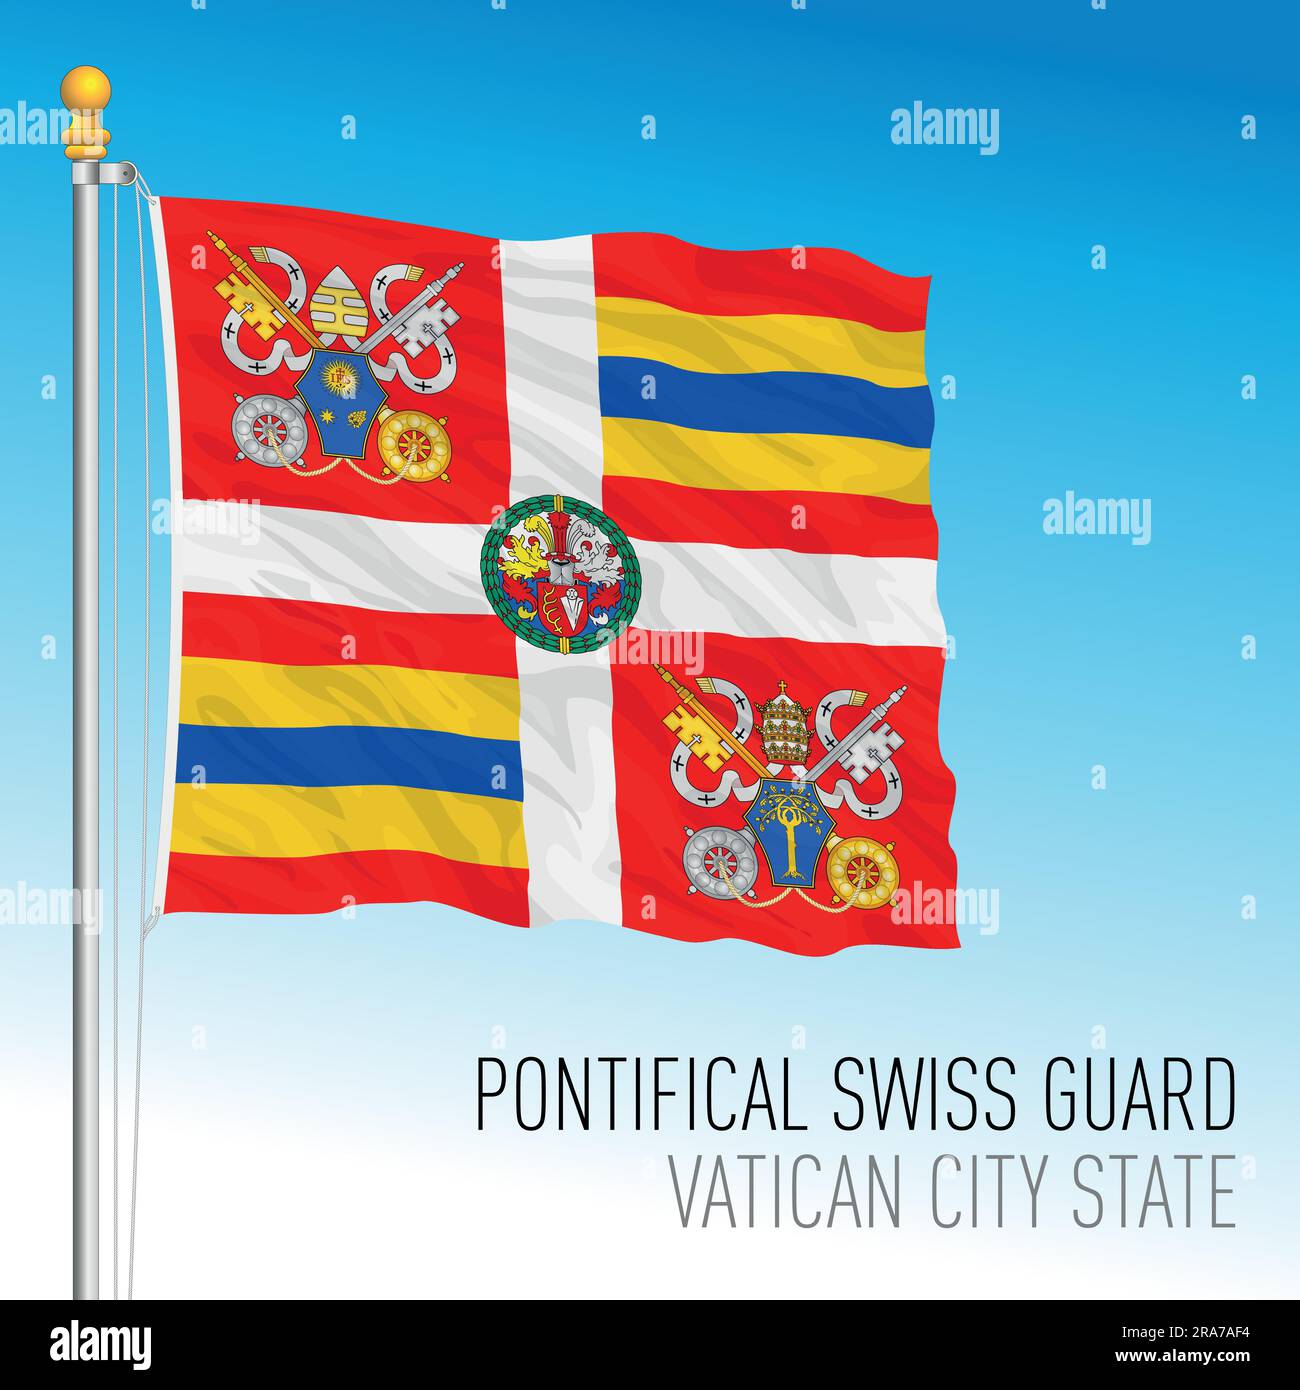 Vatican City, flag of the Swiss Guard of Francis I pope, vector illustration Stock Vector